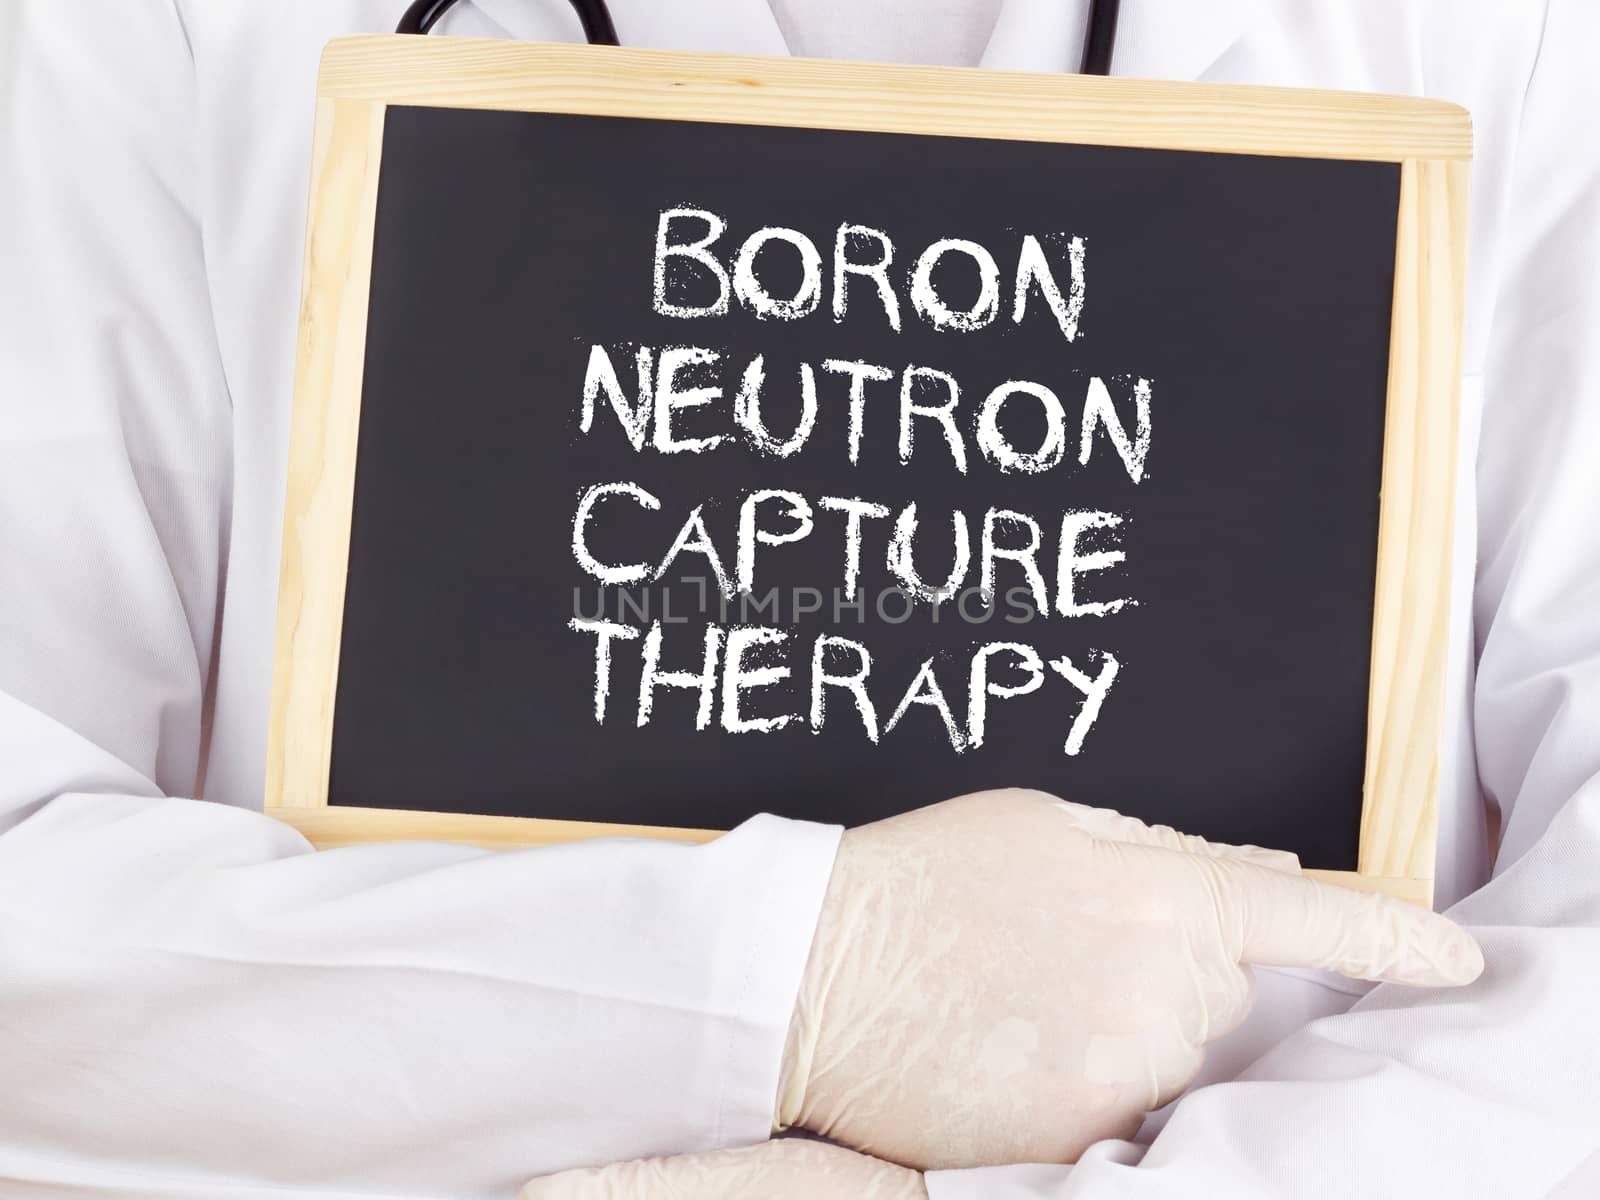 Doctor shows information: boron neutron capture therapy by gwolters